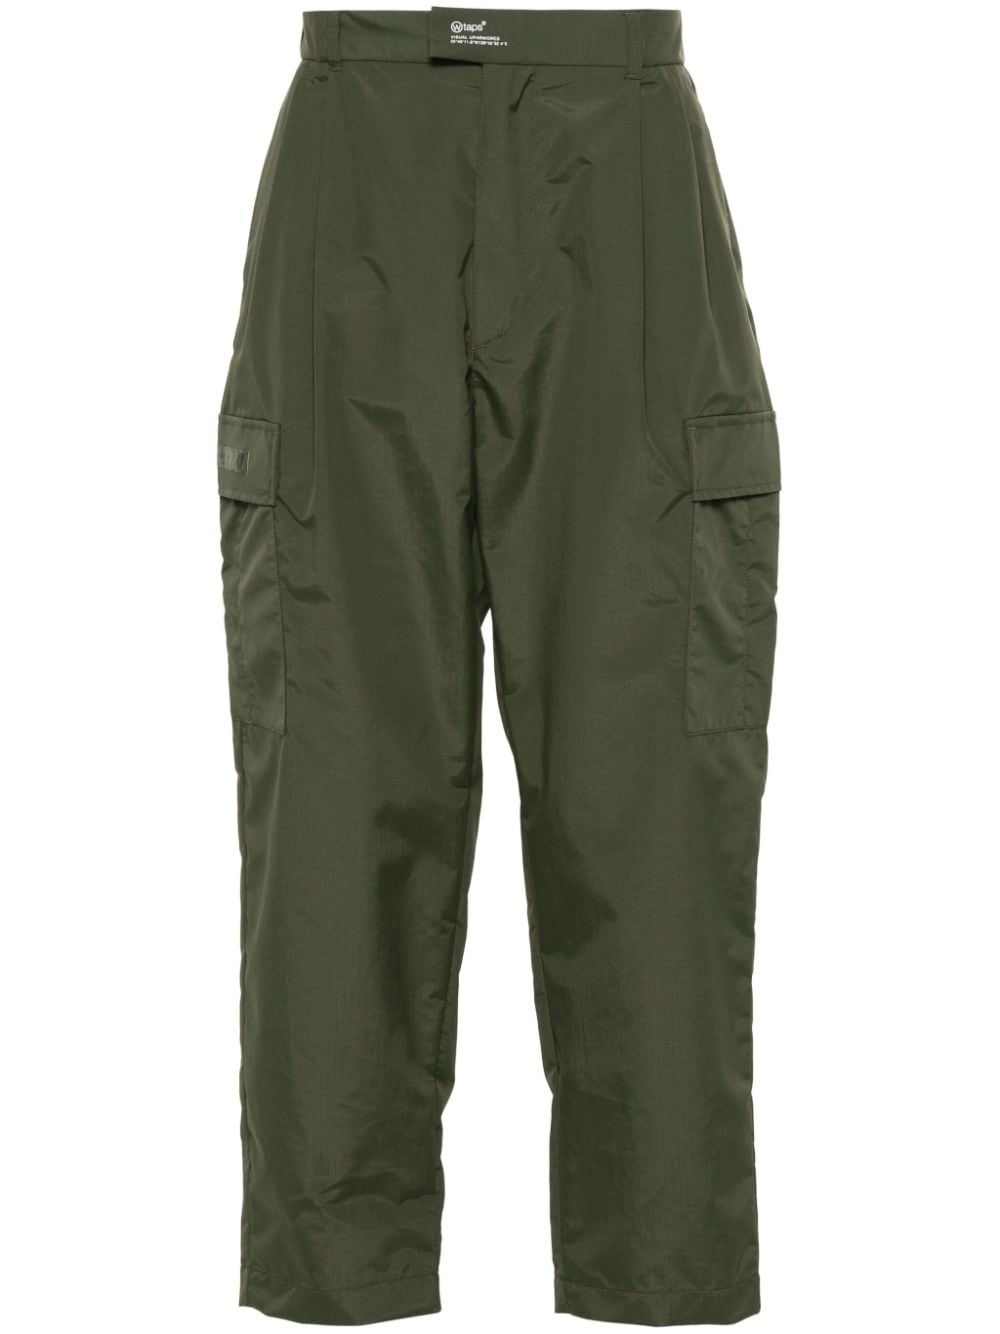 WTAPS tapered ripstop cargo trousers - Green